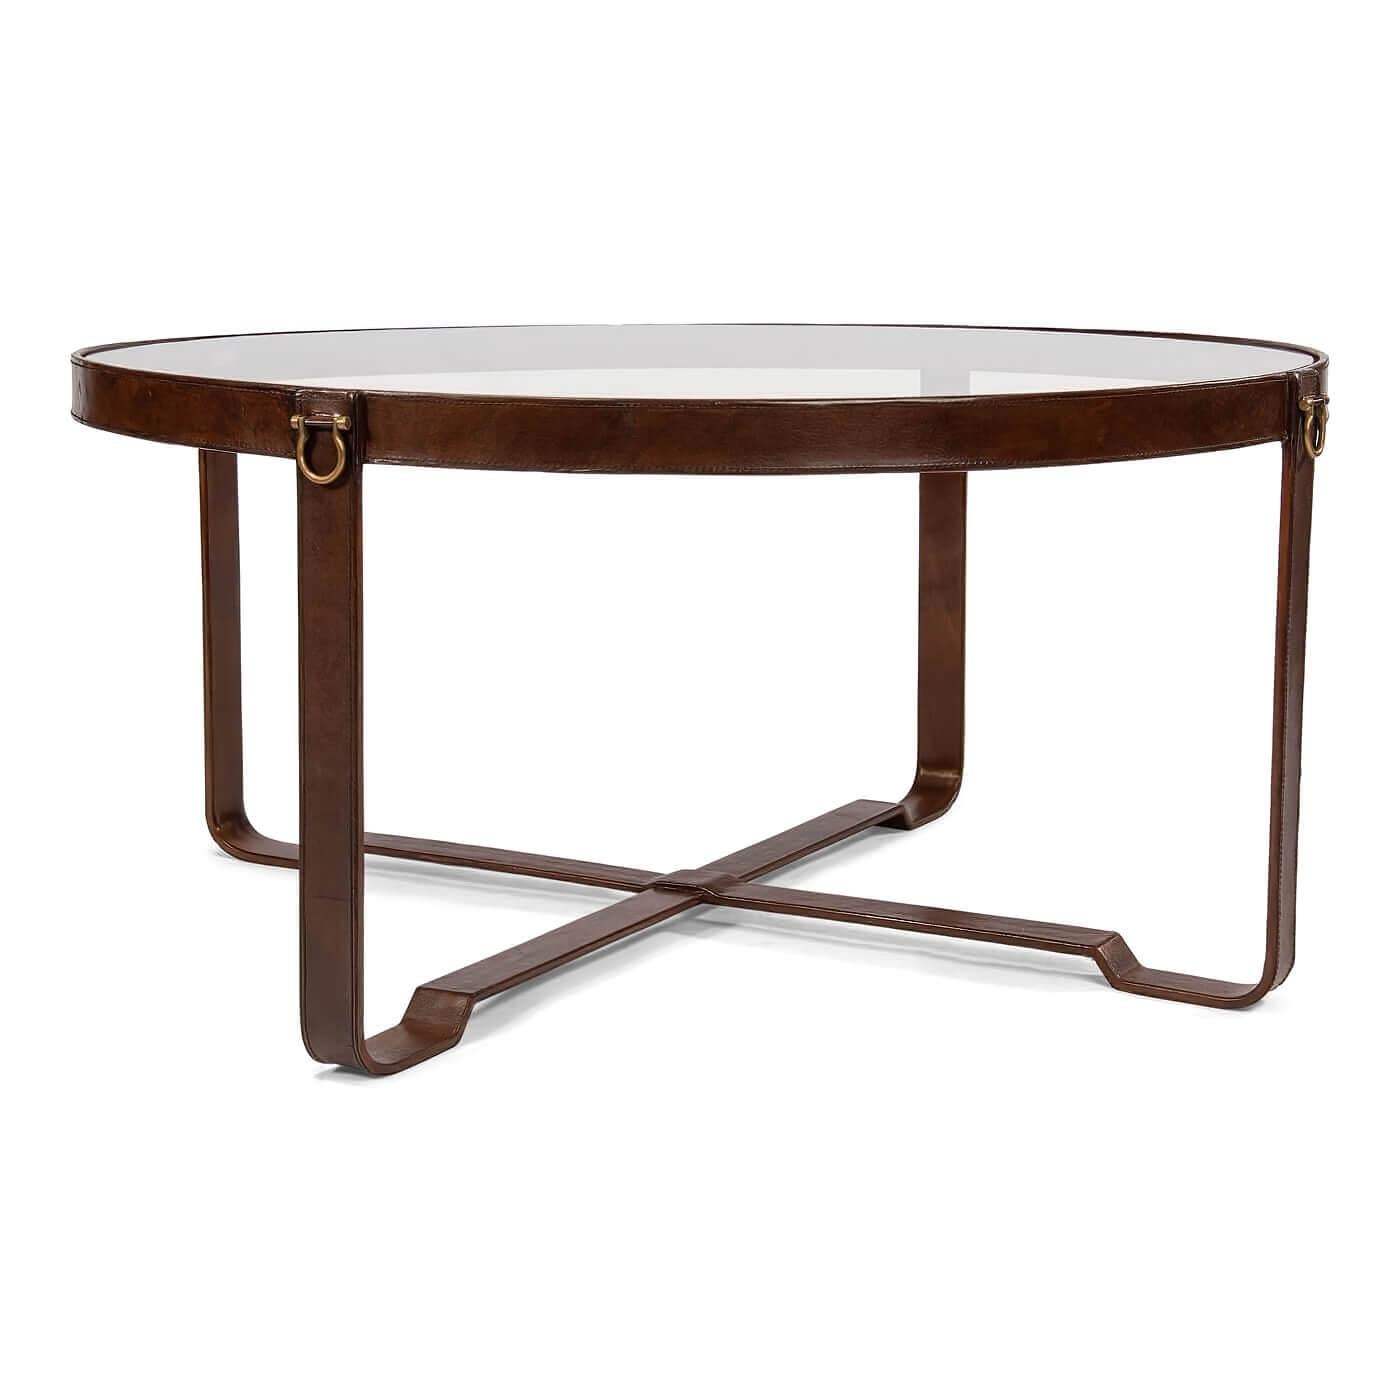 A modern leather-wrapped glass top round coffee table. The sleek glass top sits on metal legs covered in antique leather with brass details. The brass details on the sides give this piece an equestrian feel. 

Dimensions: 40